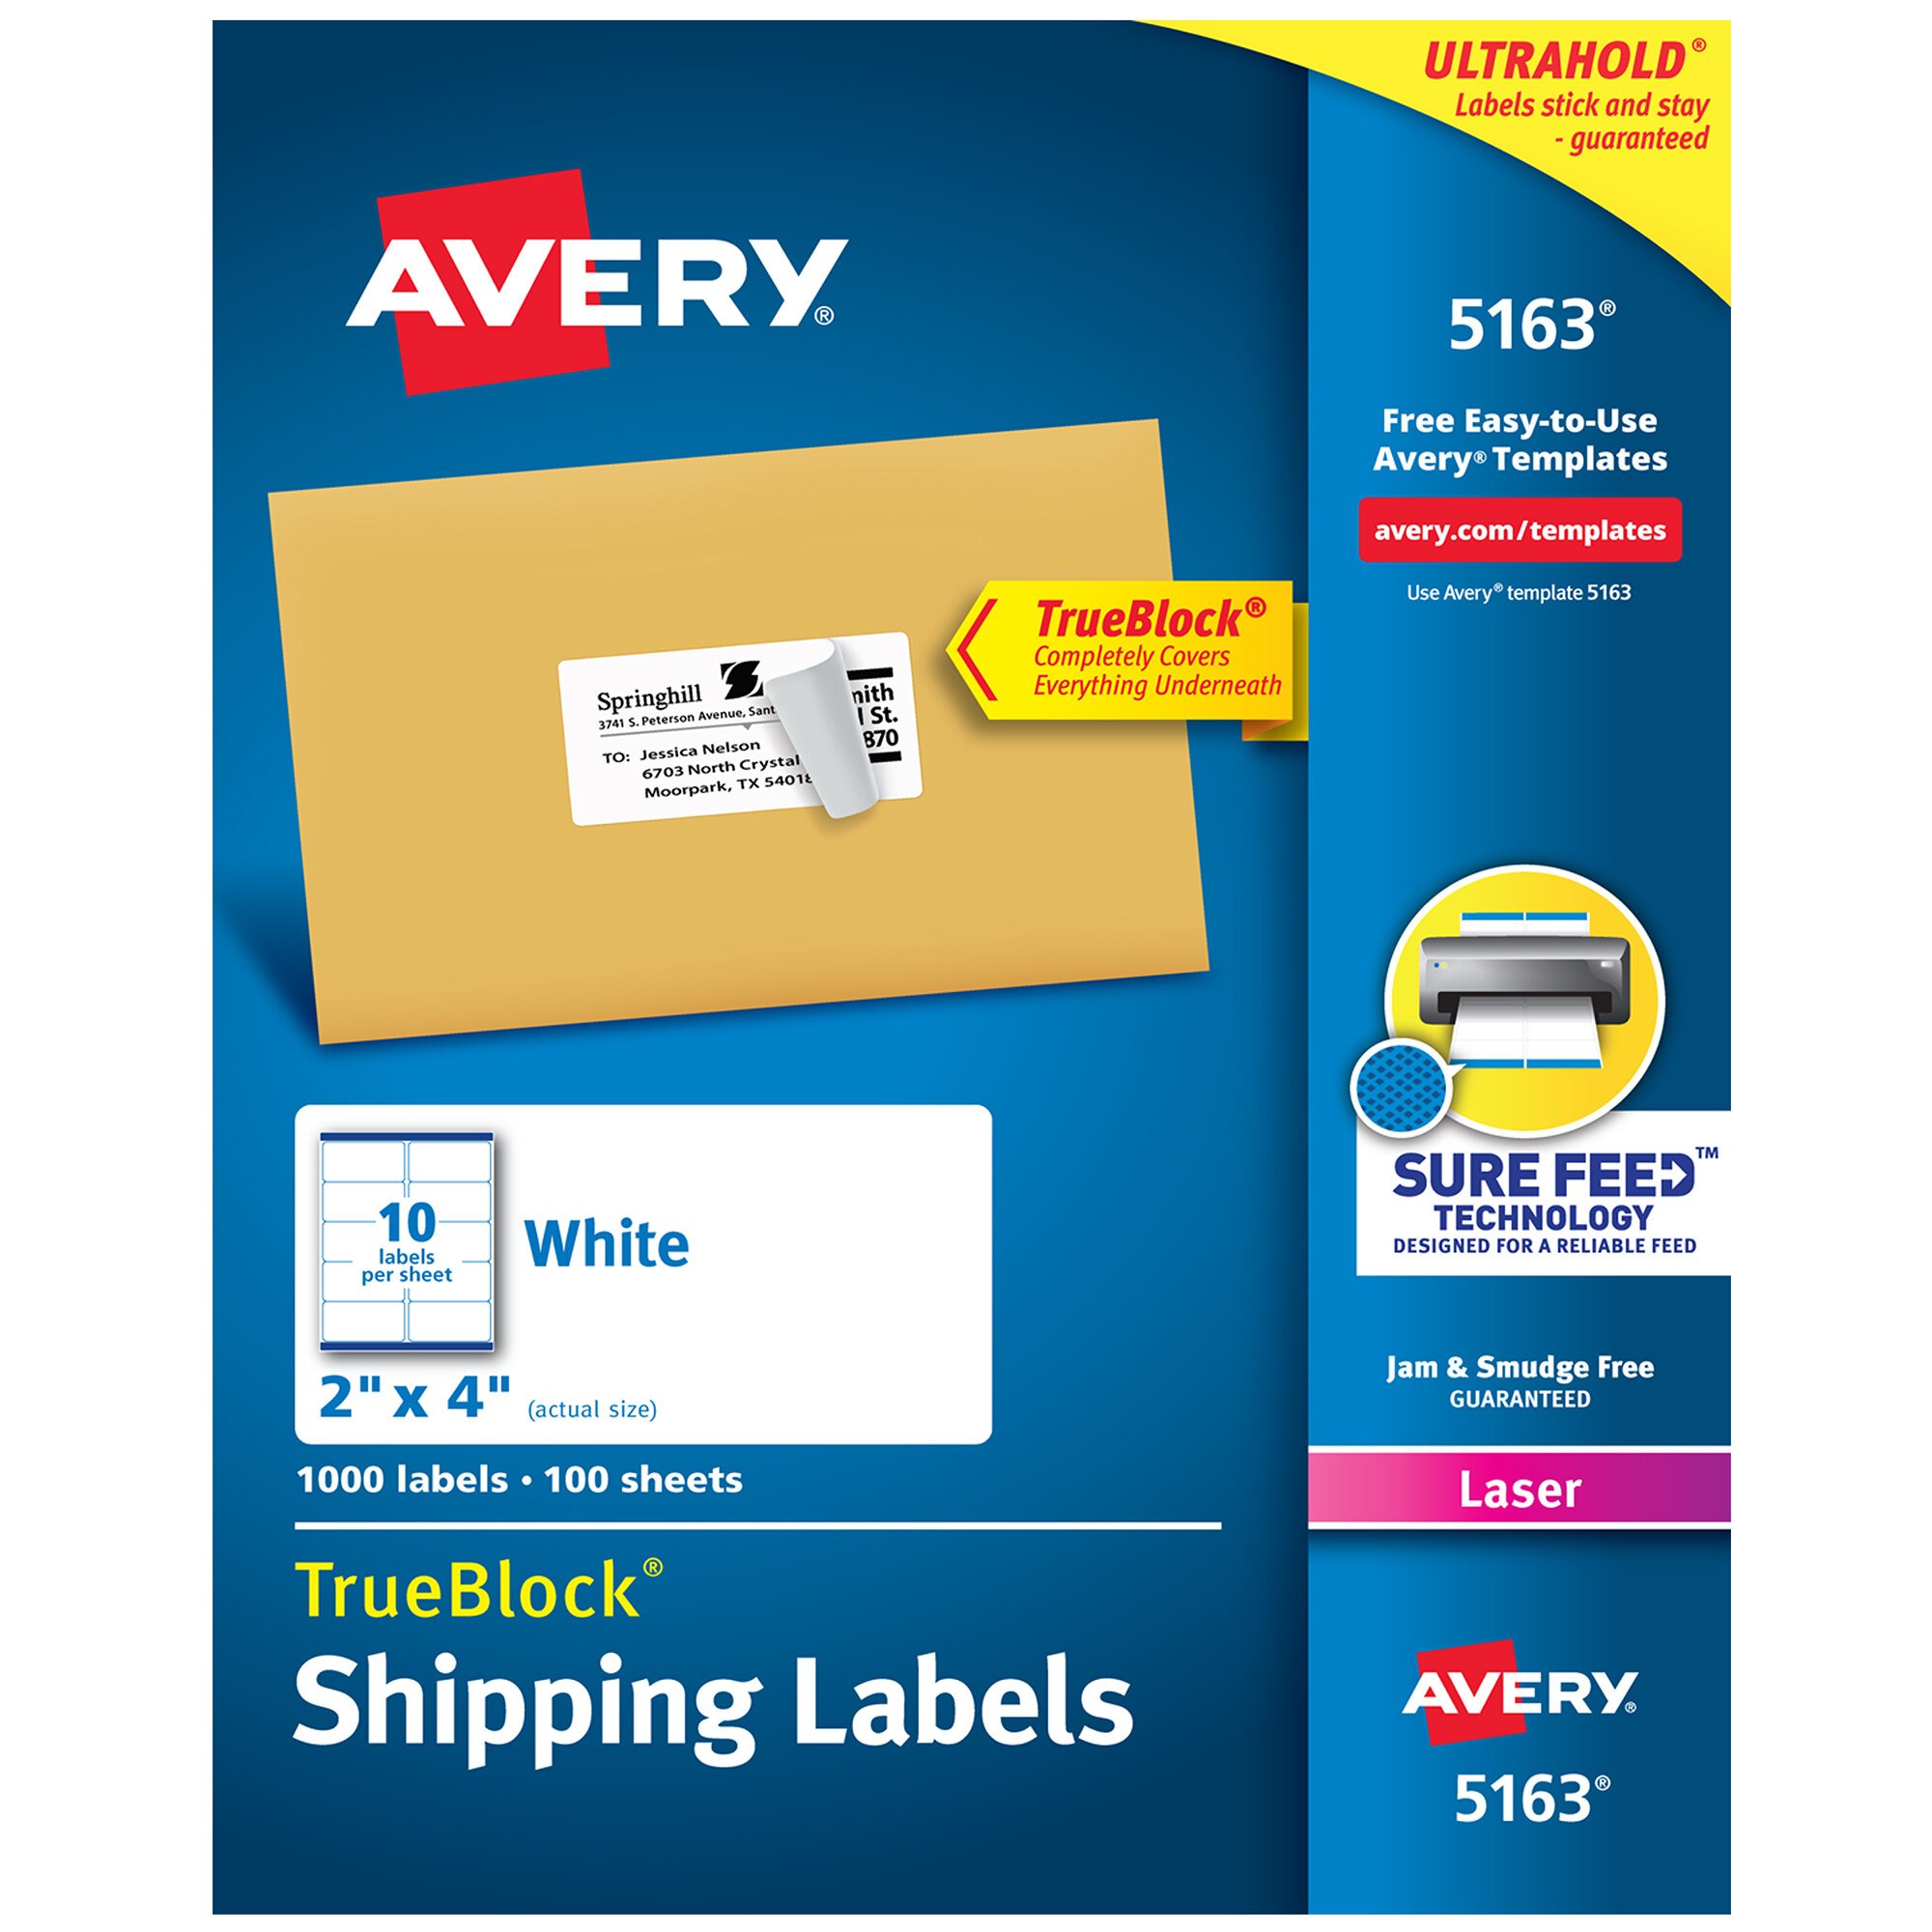 avery-labels-5163-template